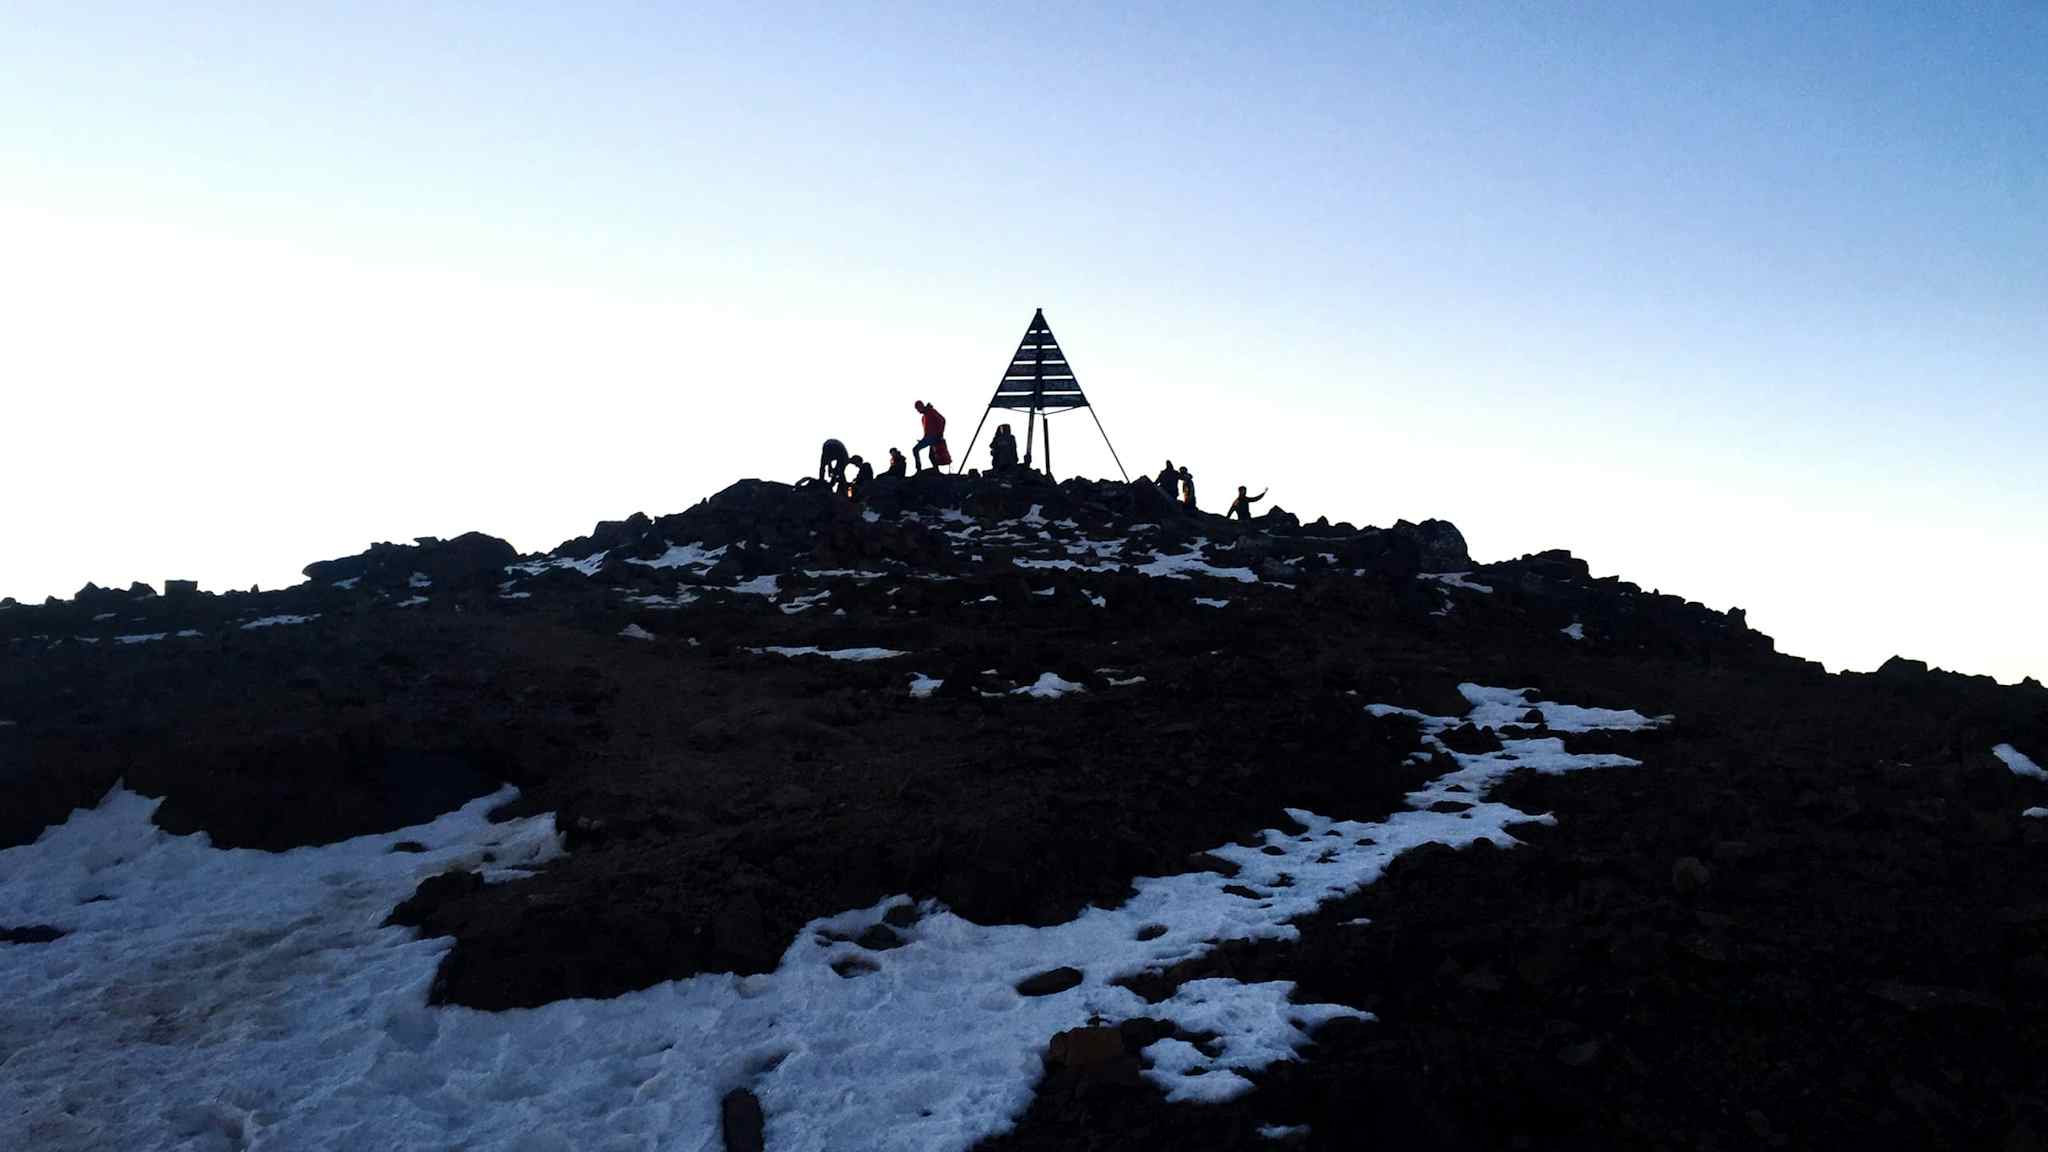 A silhouette of hikers at the summit of Mount Toubkal in the Atlas Mountains, Morocco. 